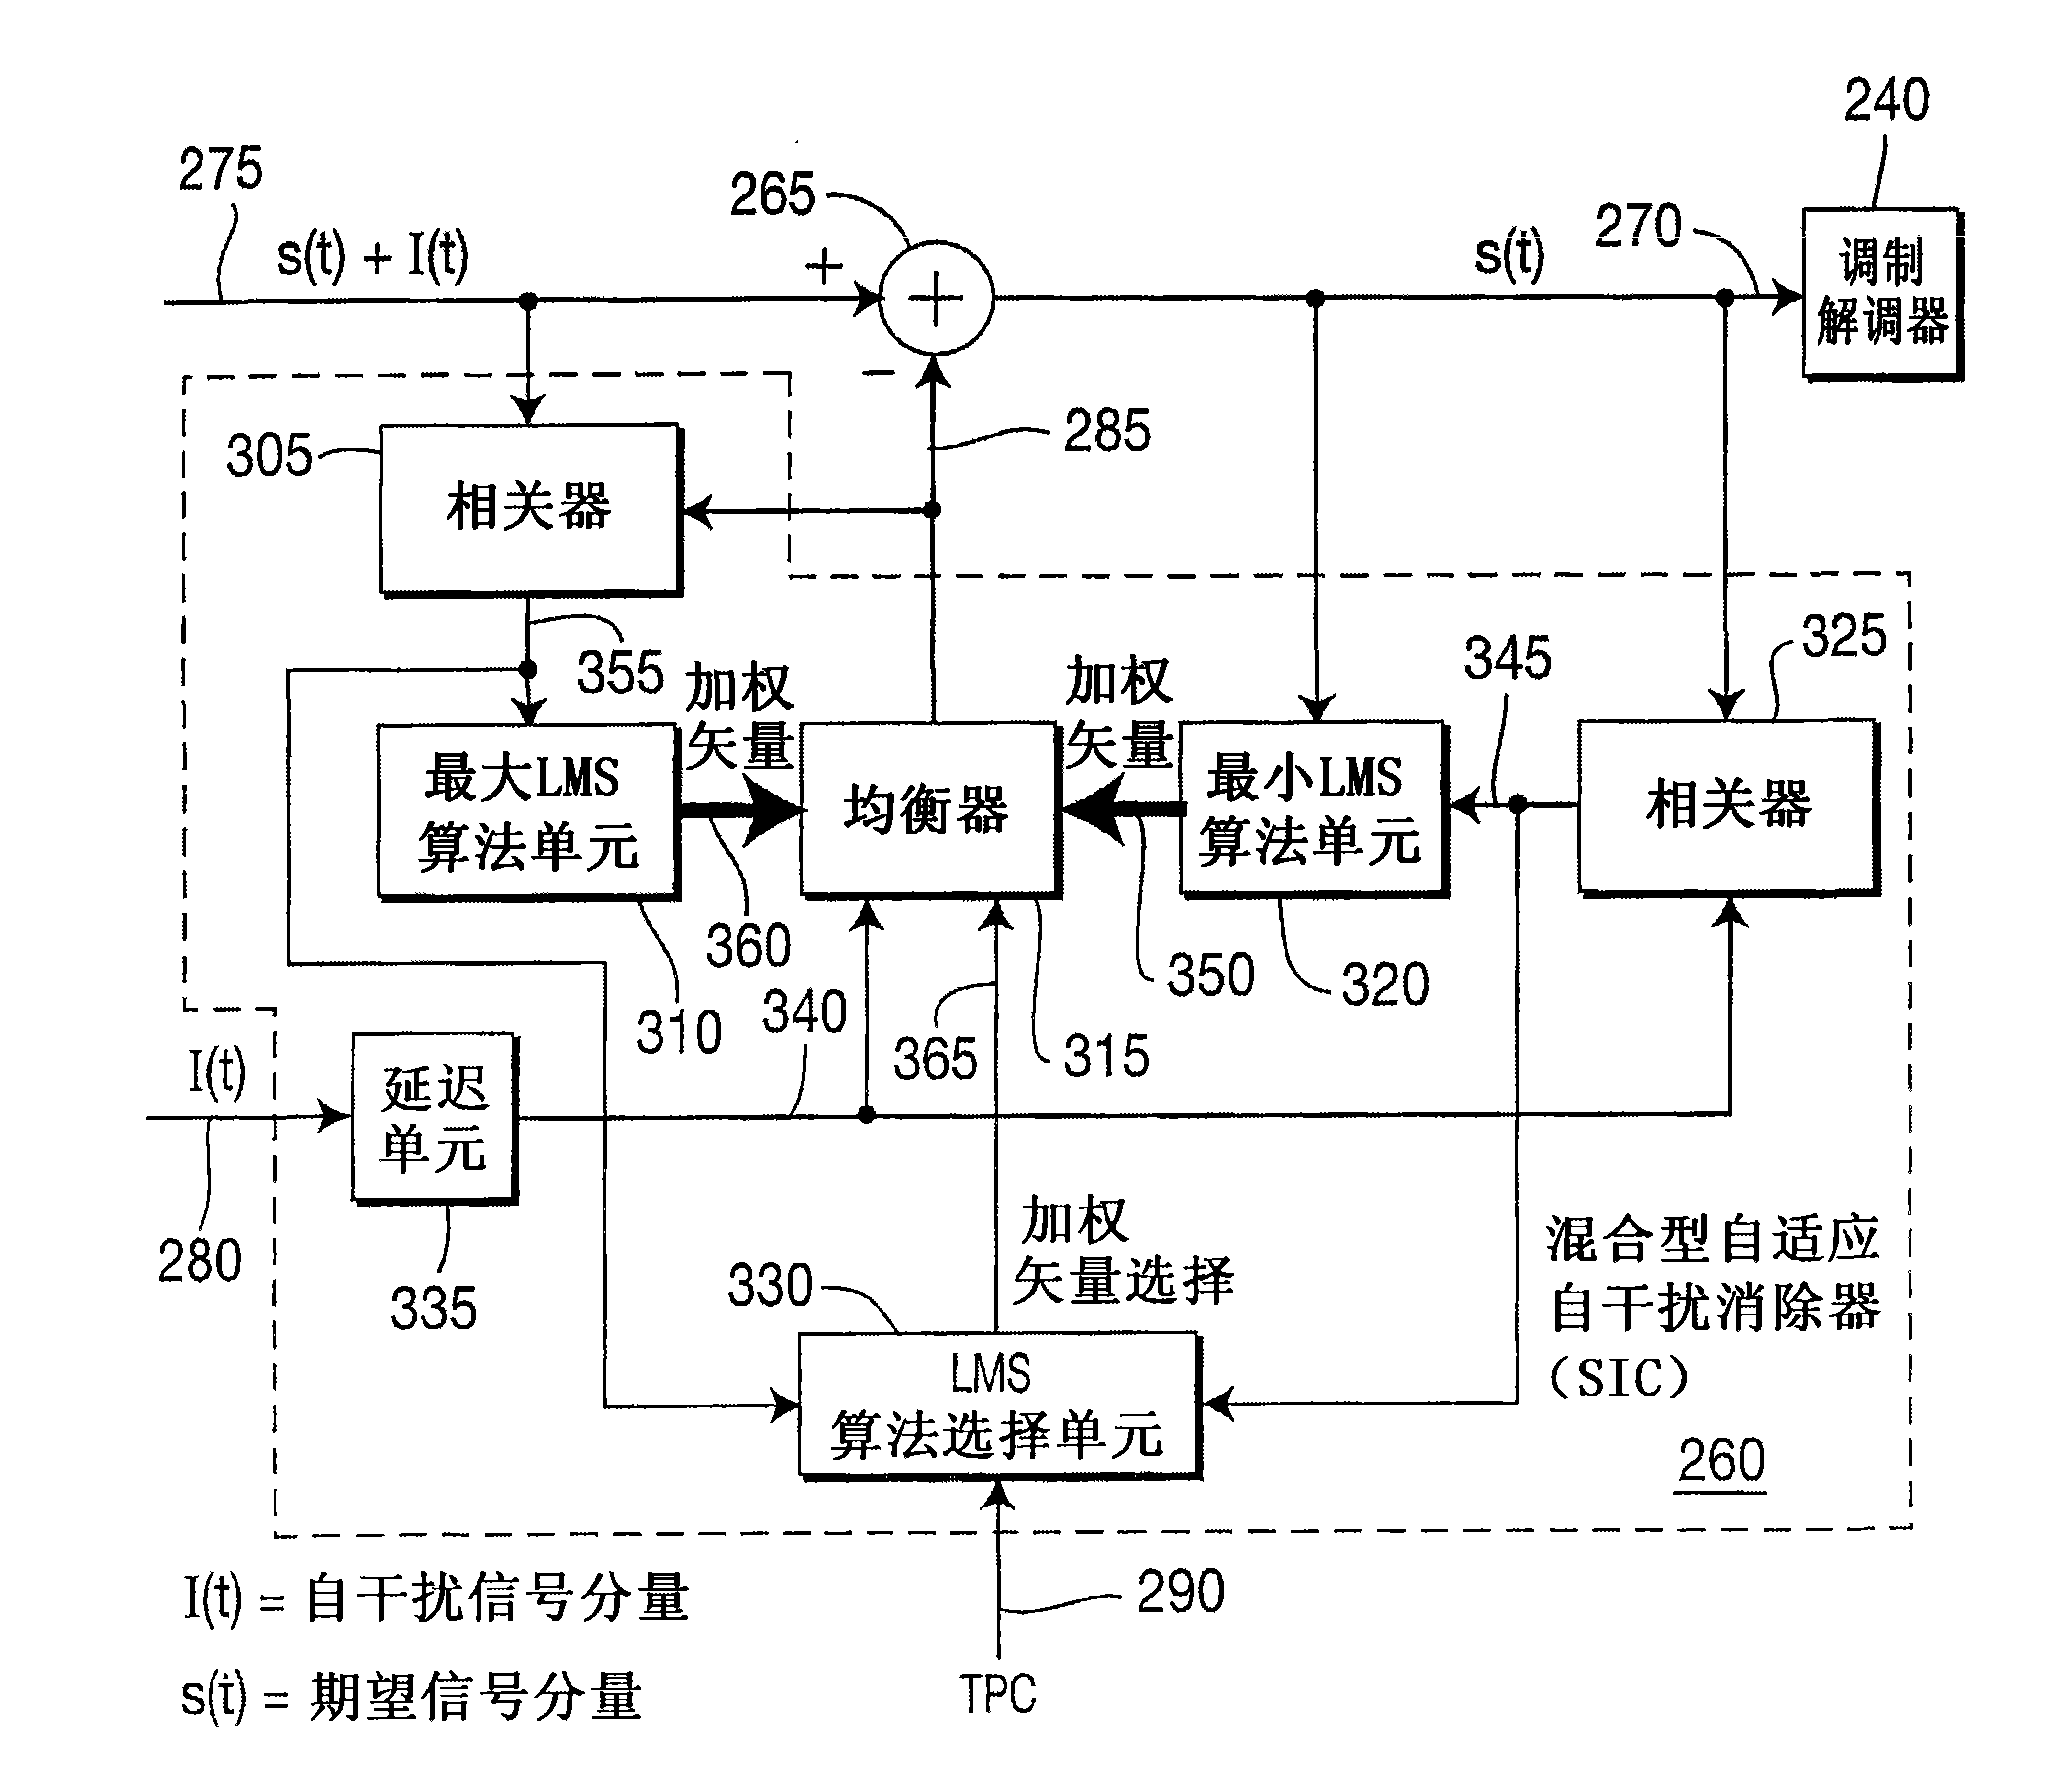 Transceiver with hybrid adaptive interference canceller for removing transmitter generated noise